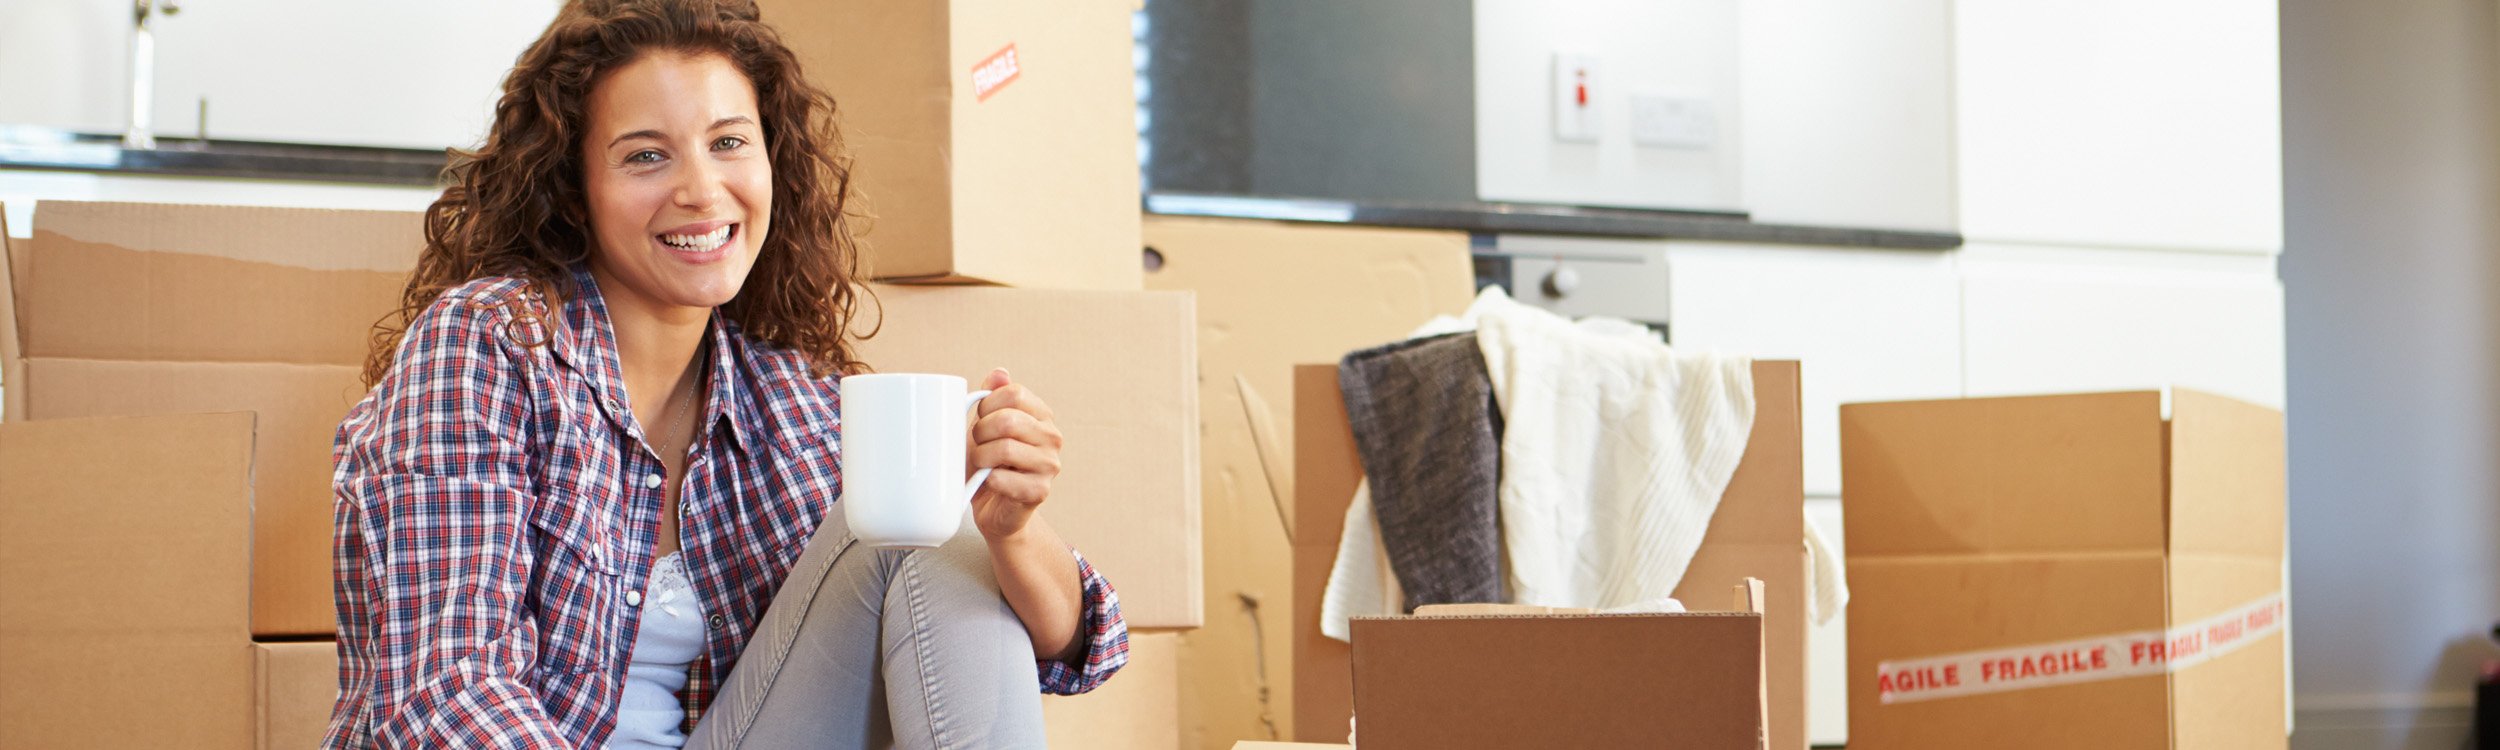 smiling girl holding coffee sitting on floor with moving boxes